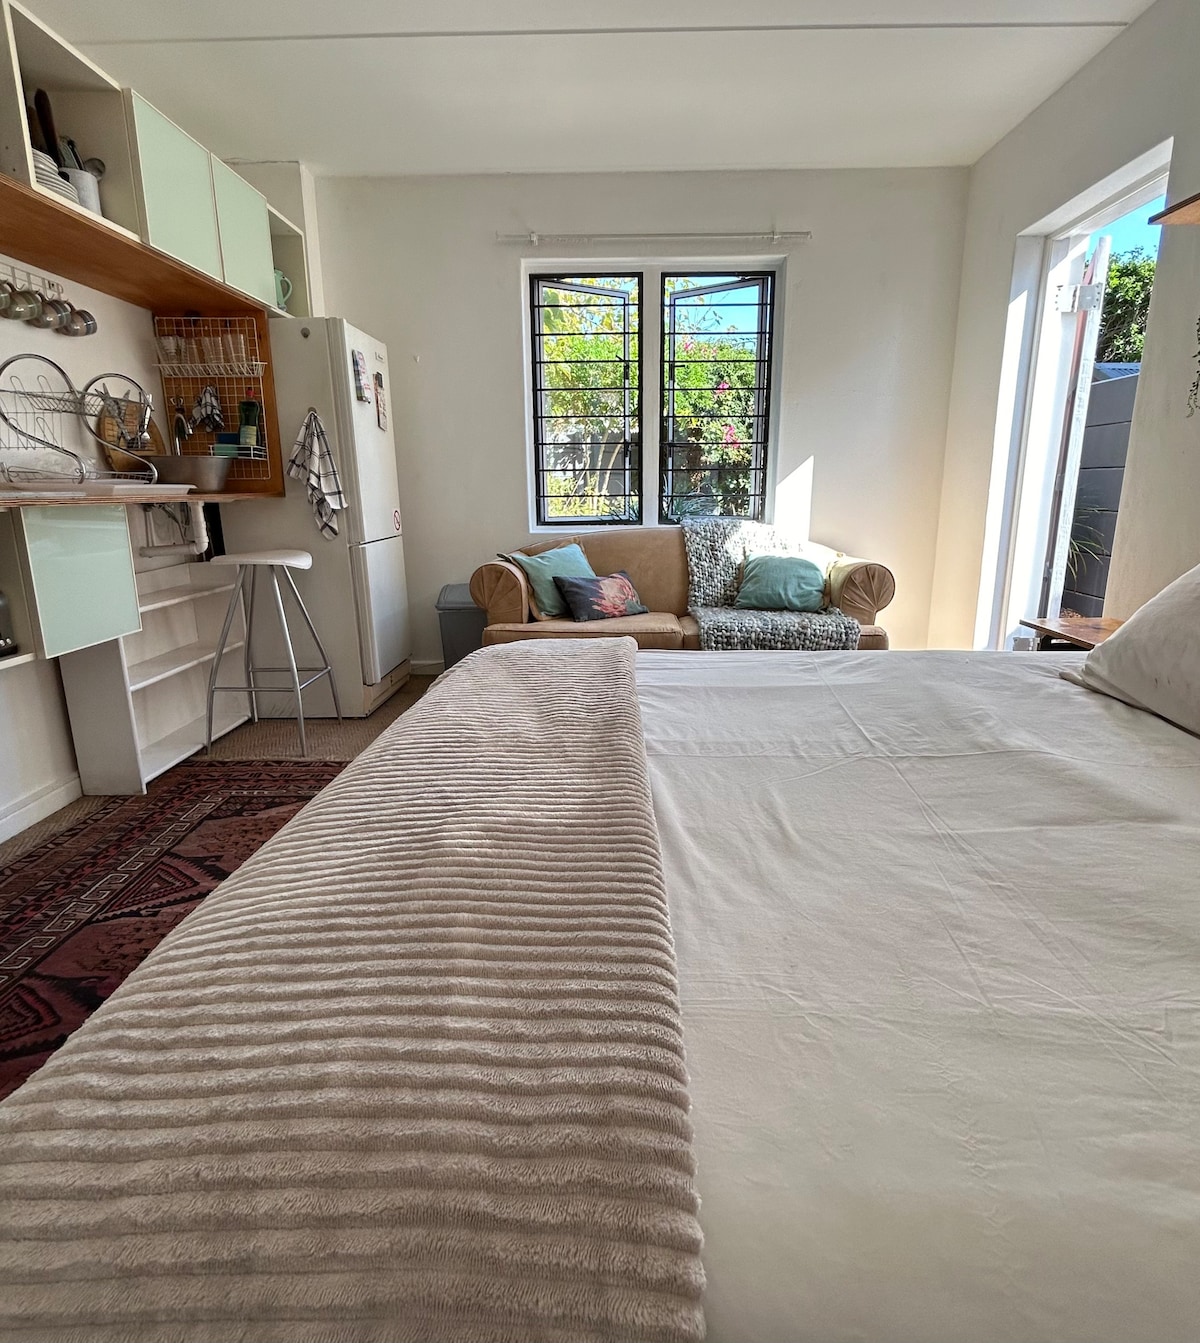 Serene one-bed Studio in Pinelands, Cape Town.